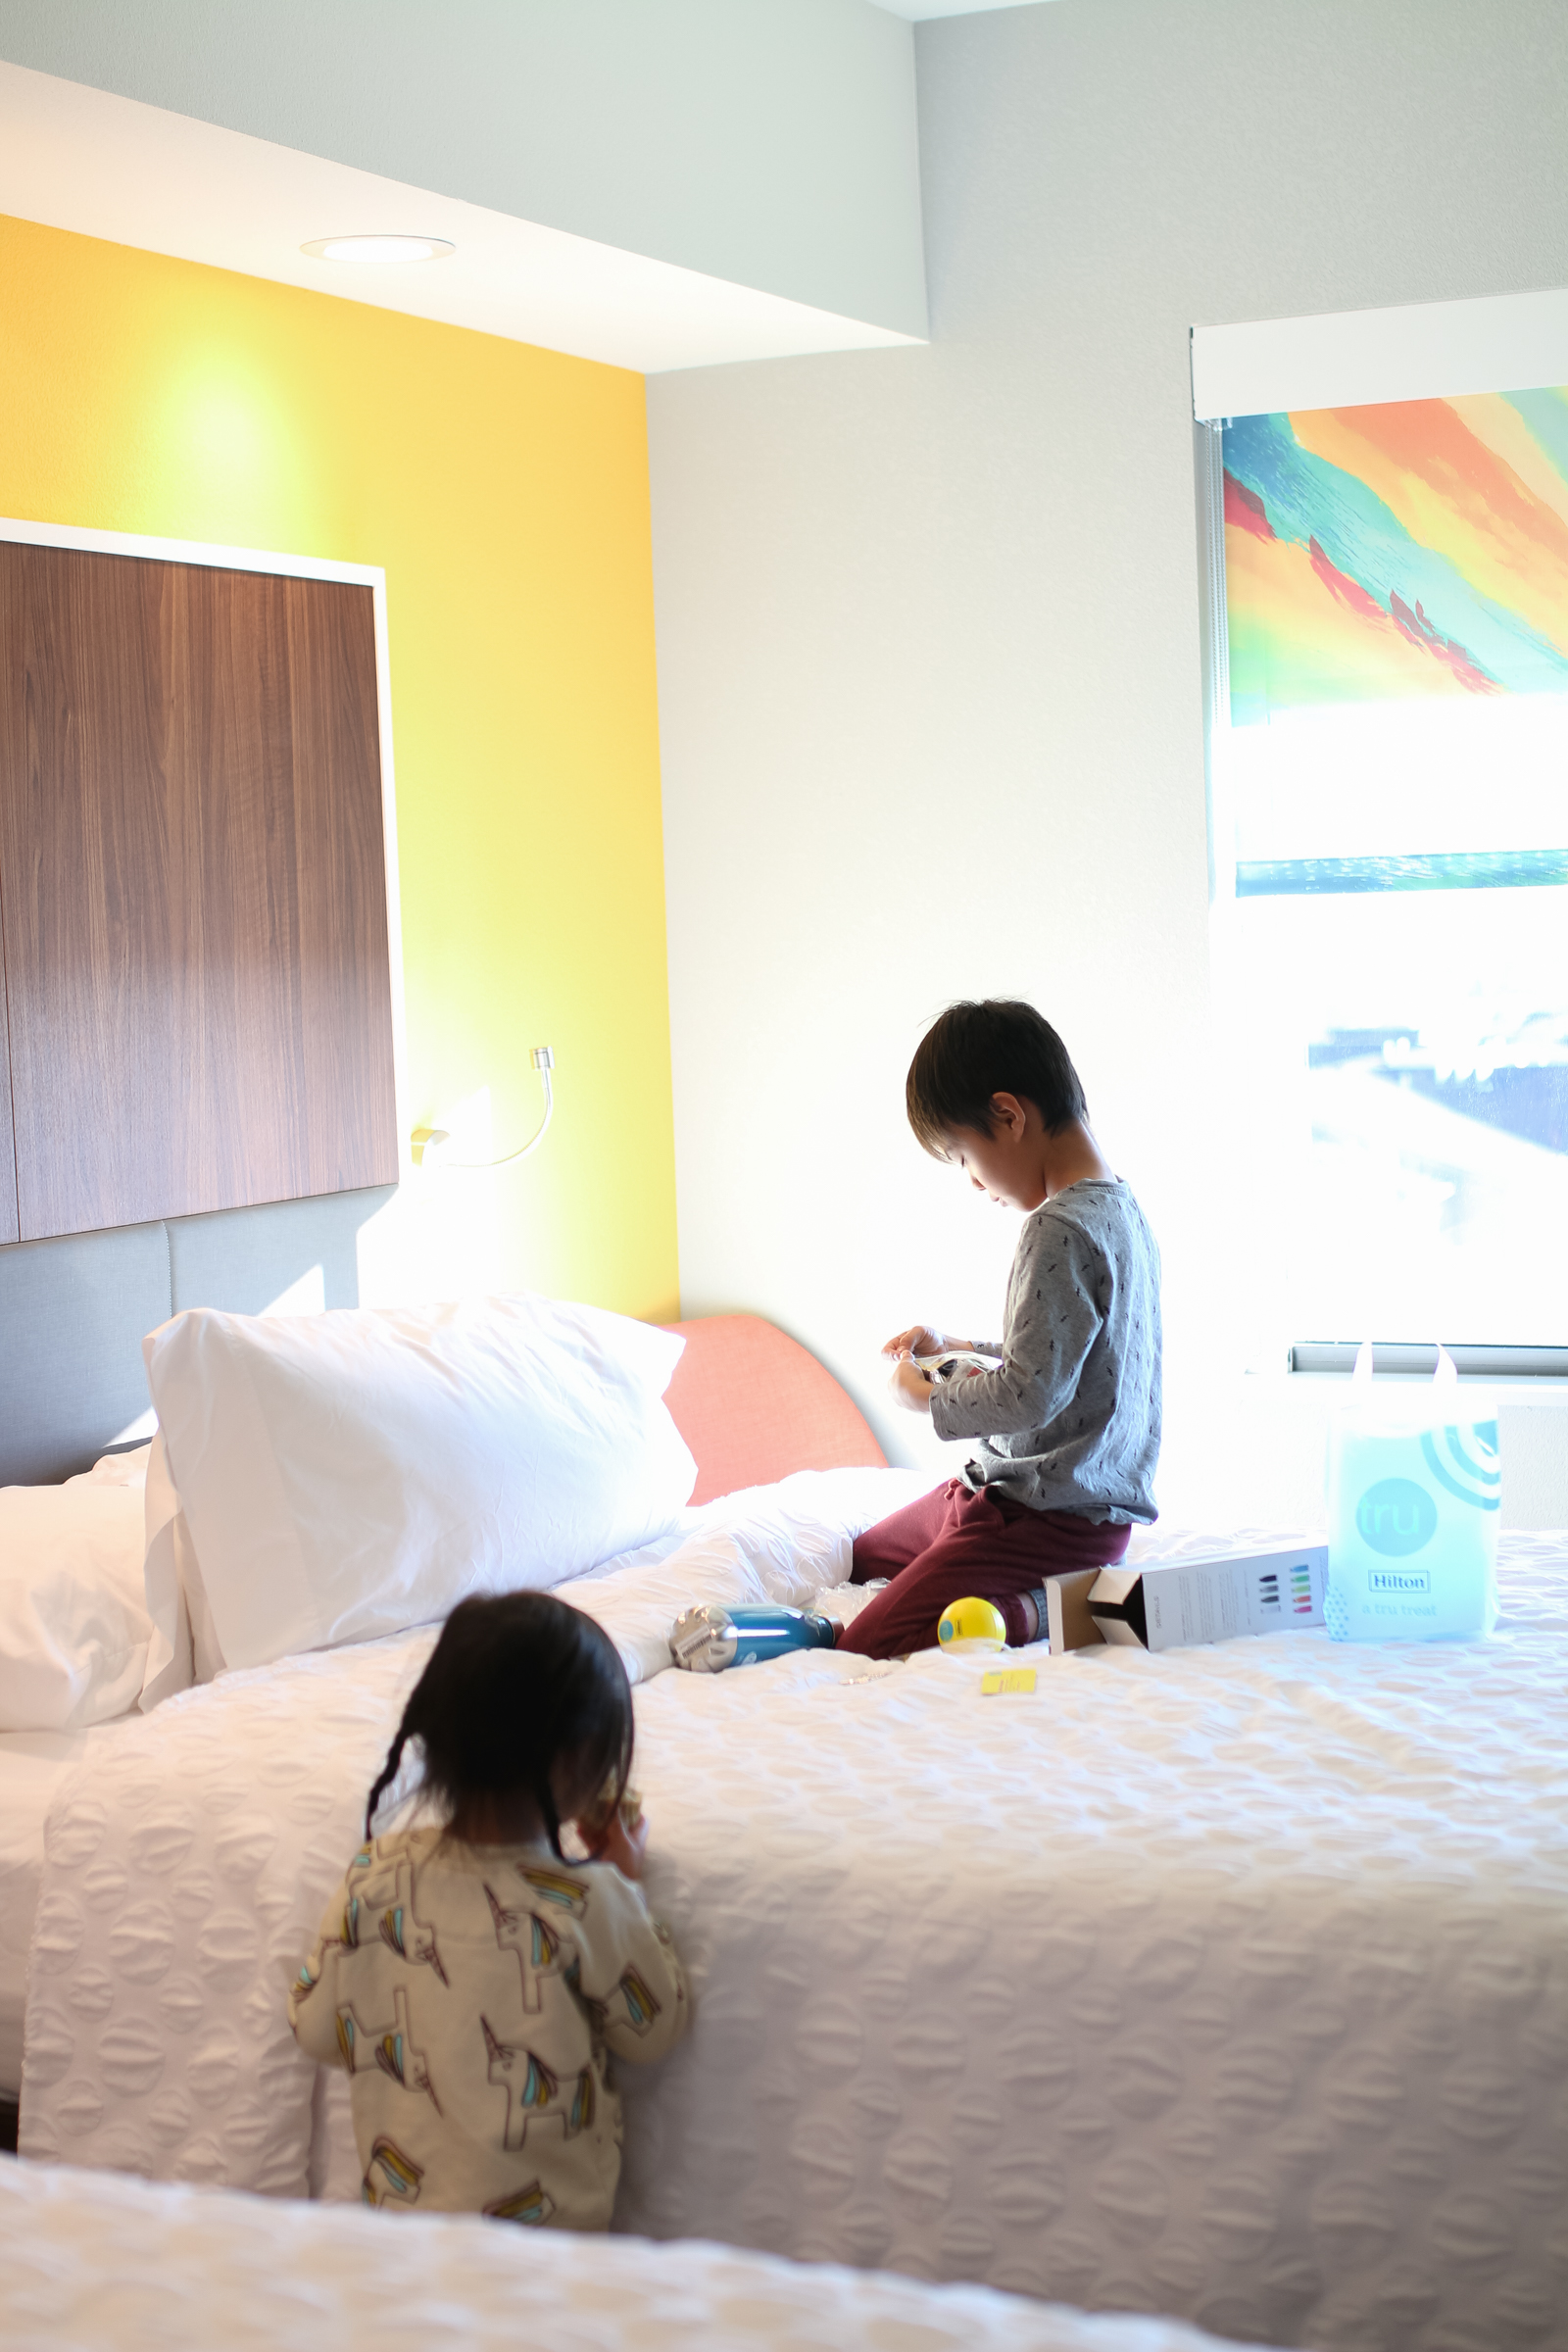 Our Awesome Stay at the Tru by Hilton in Cheyenne, WY by popular Utah blogger Sandy A La Mode